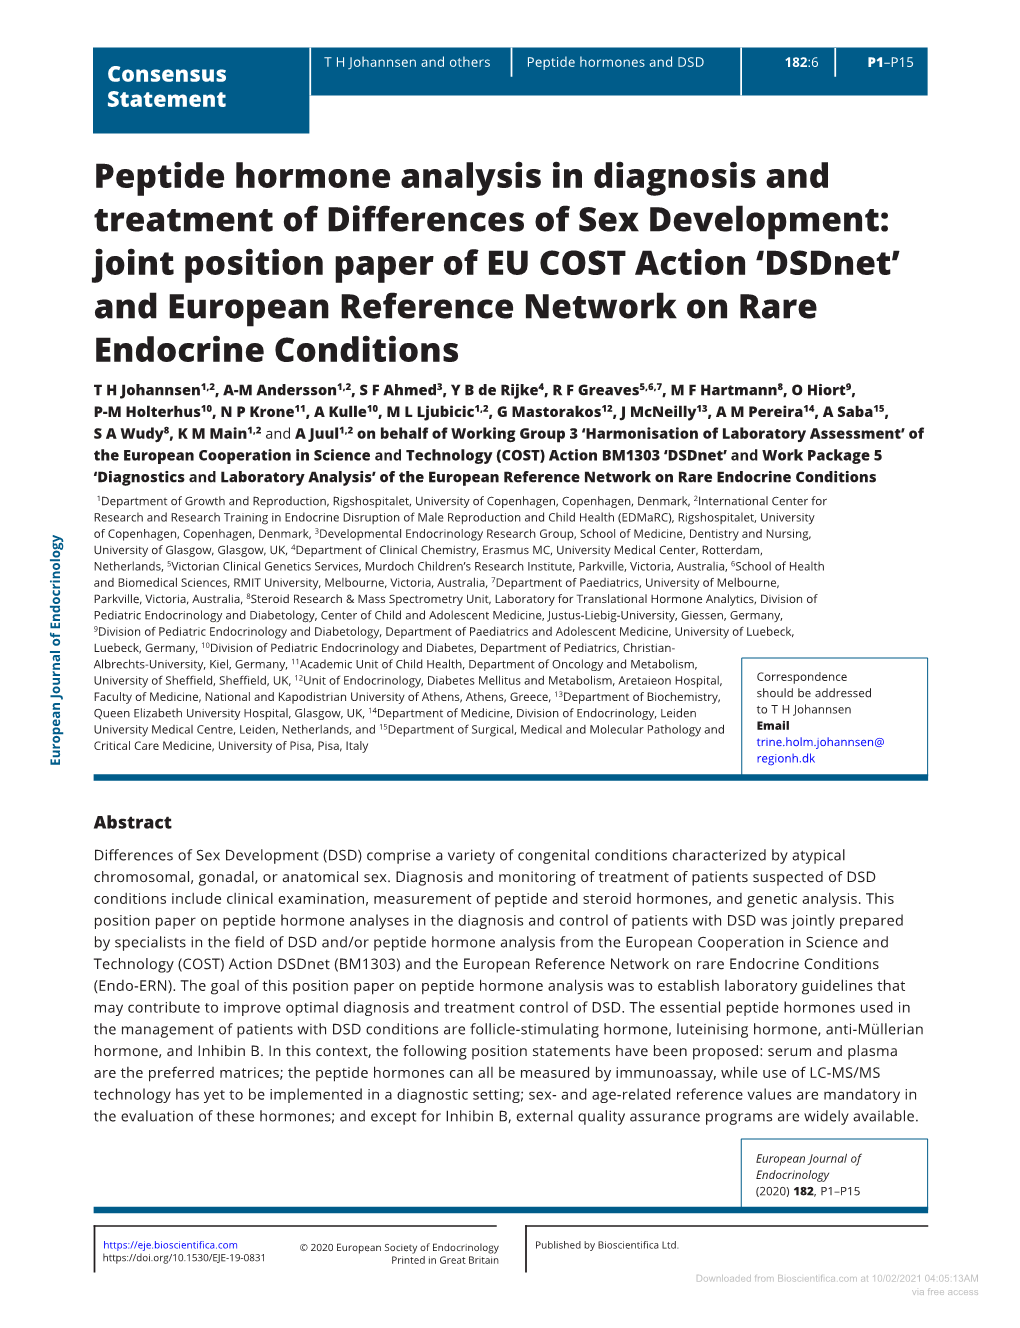 Peptide Hormone Analysis in Diagnosis and Treatment of Differences